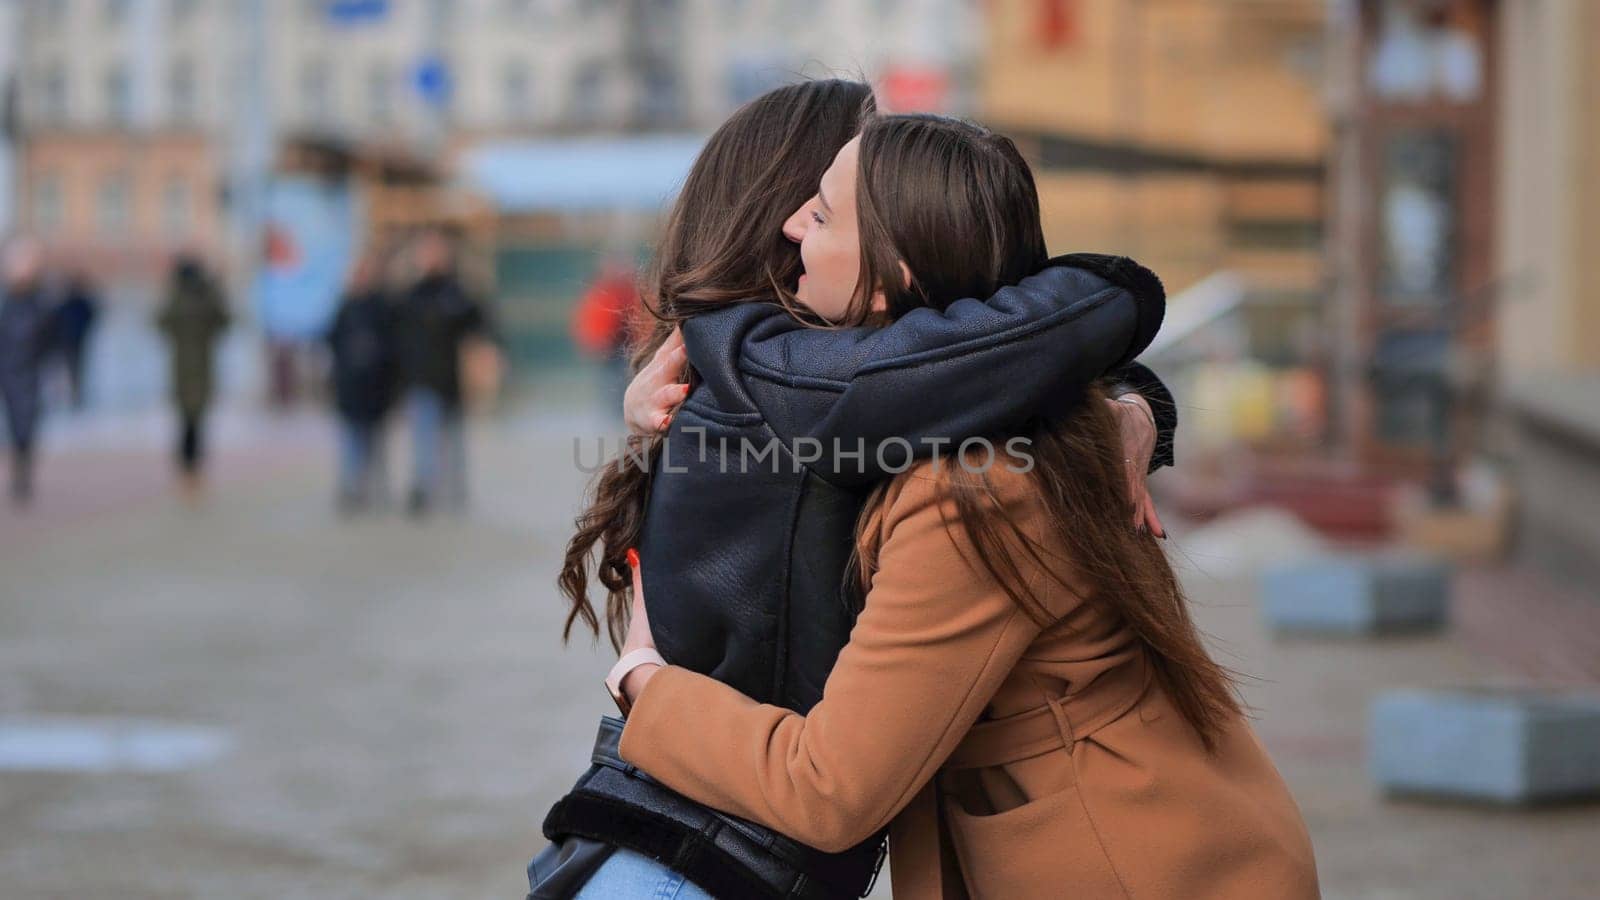 Two best friends meet on the streets of the city and hug